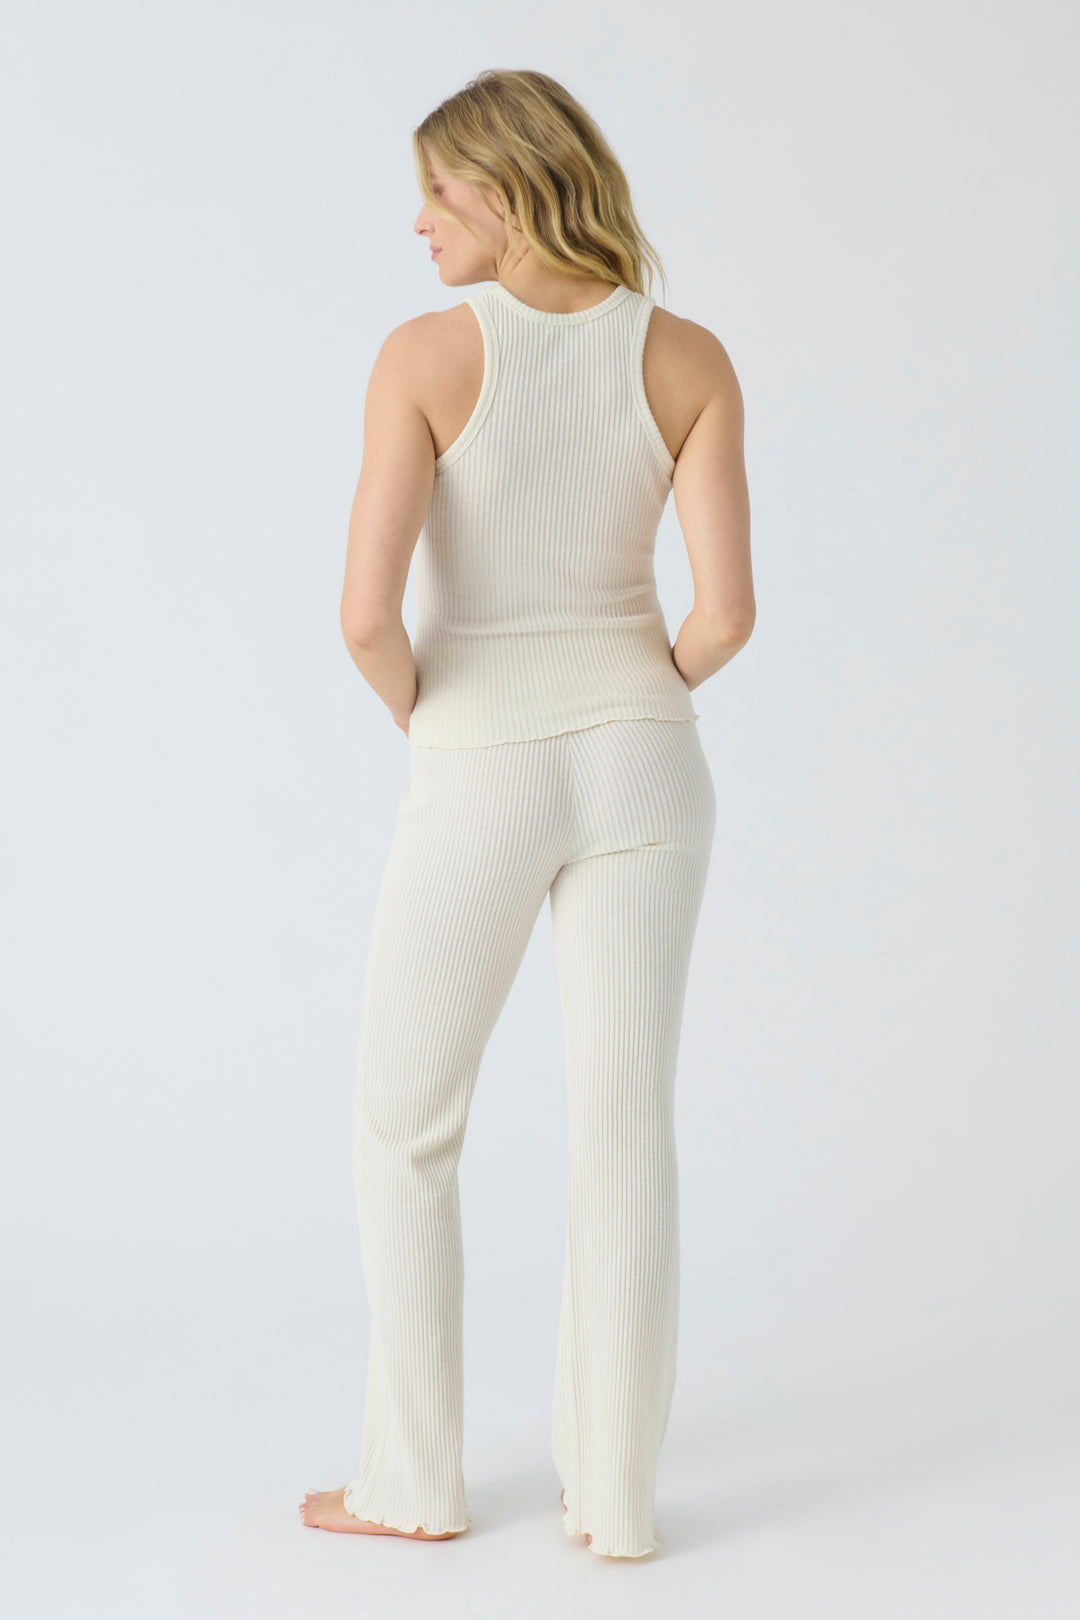 Women's ivory rib knit lounge set of tank top with scoop neck & high-waisted straight leg pant